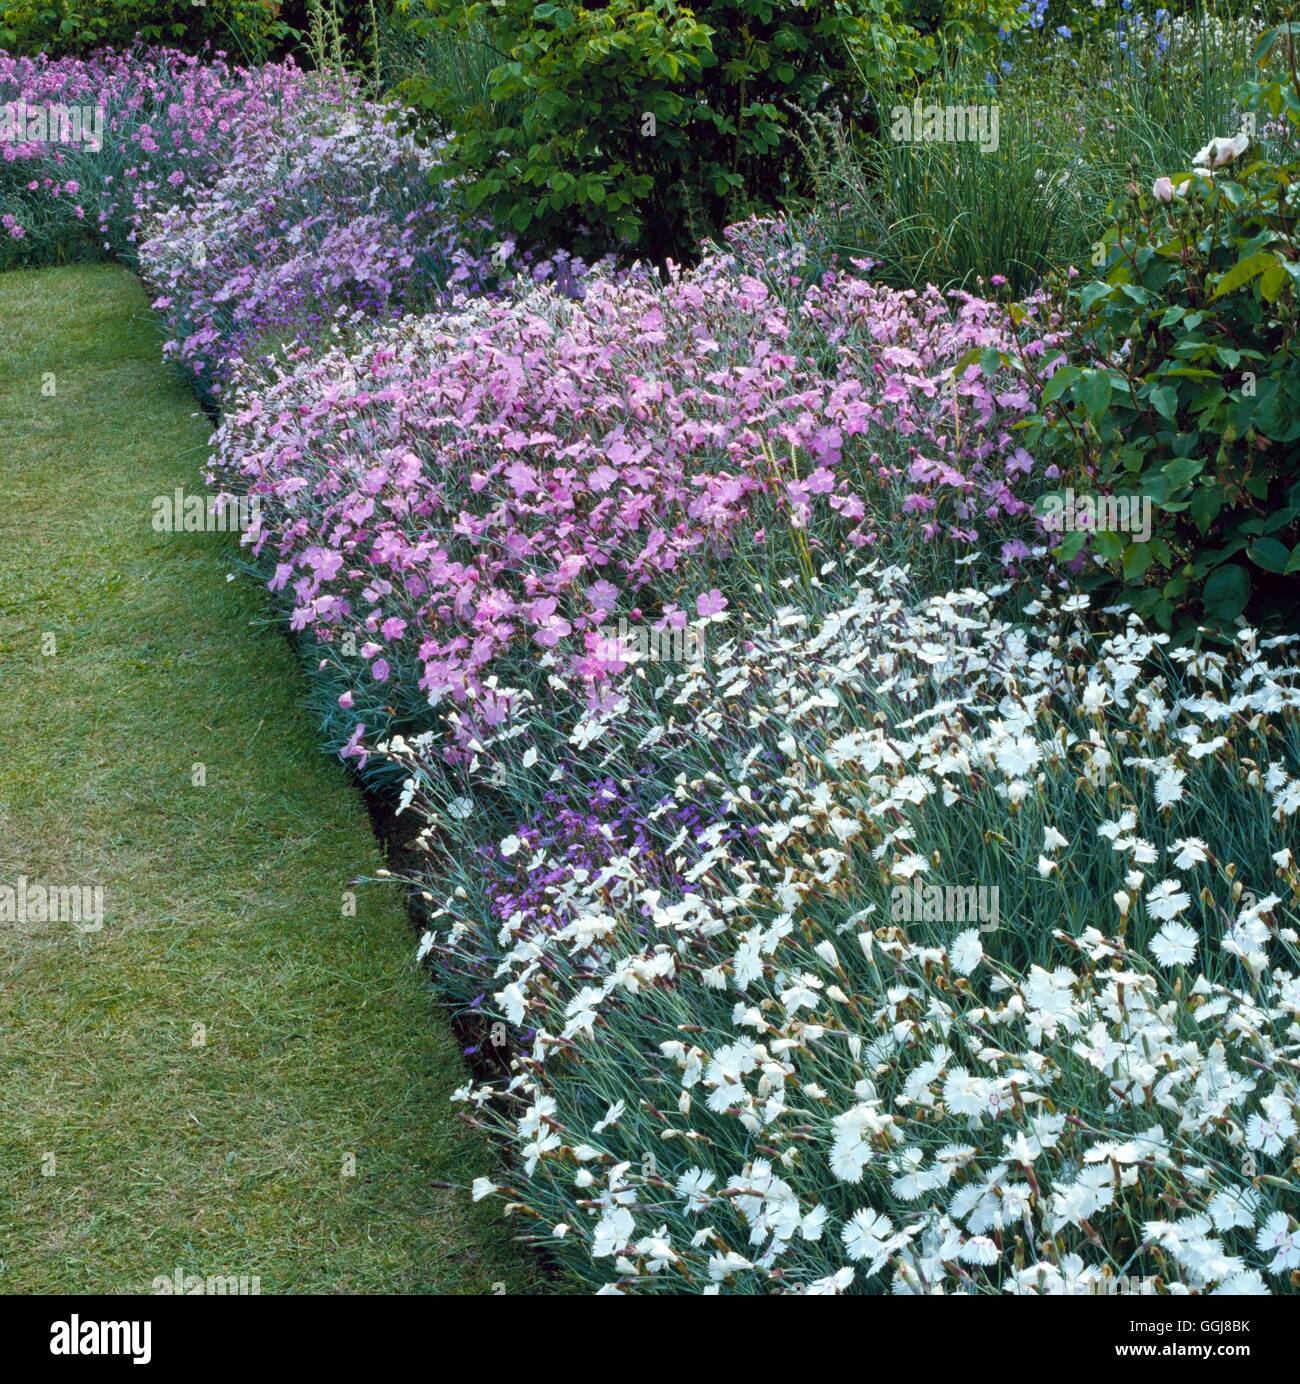 Edging Plants - Pinks (Dianthus) giving fragrance where you walk.   EDG023201     Photos Horticultur Stock Photo